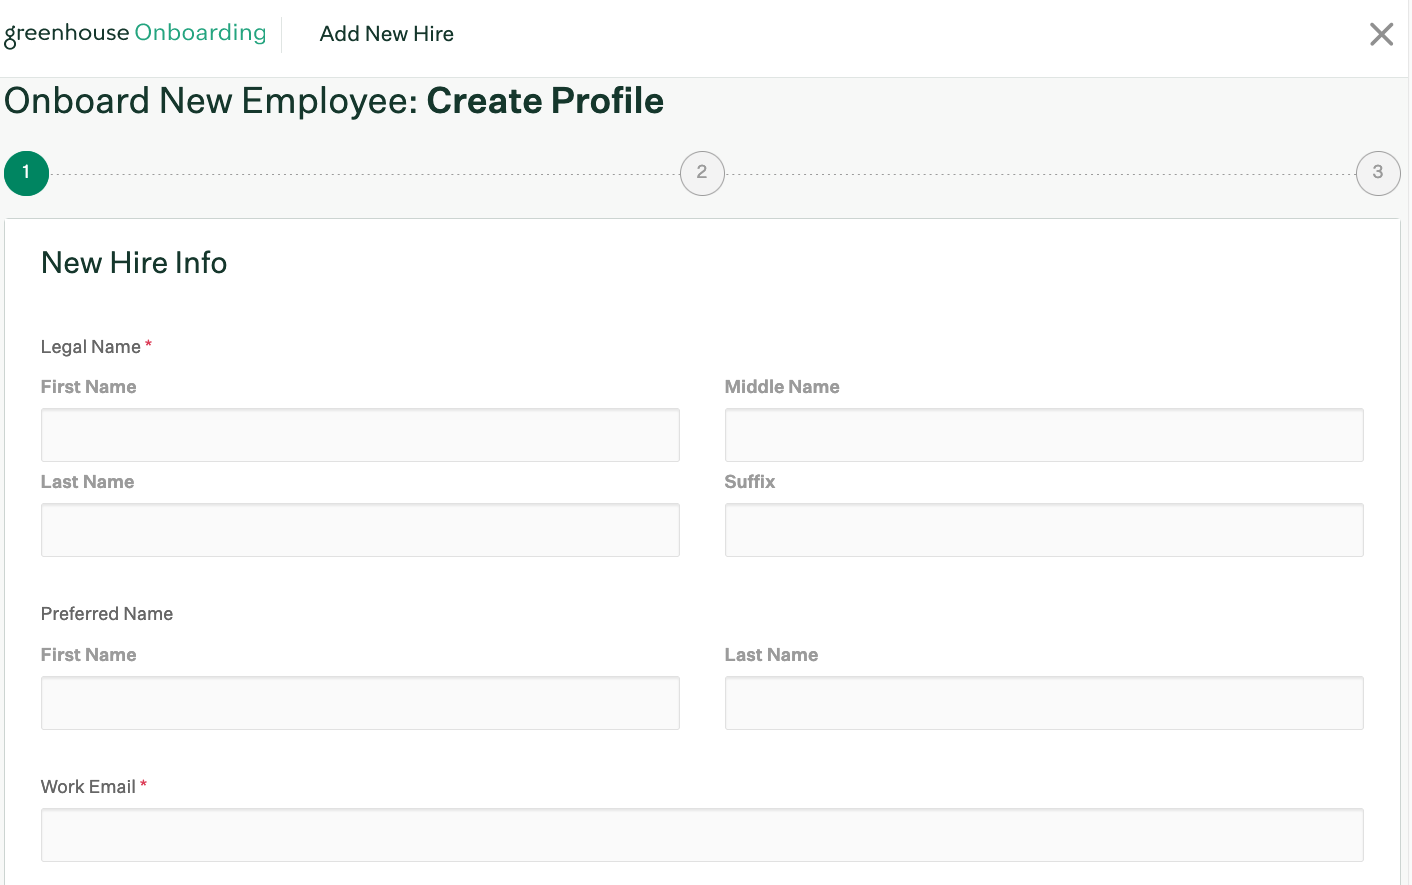 Screenshot of details page for new hire